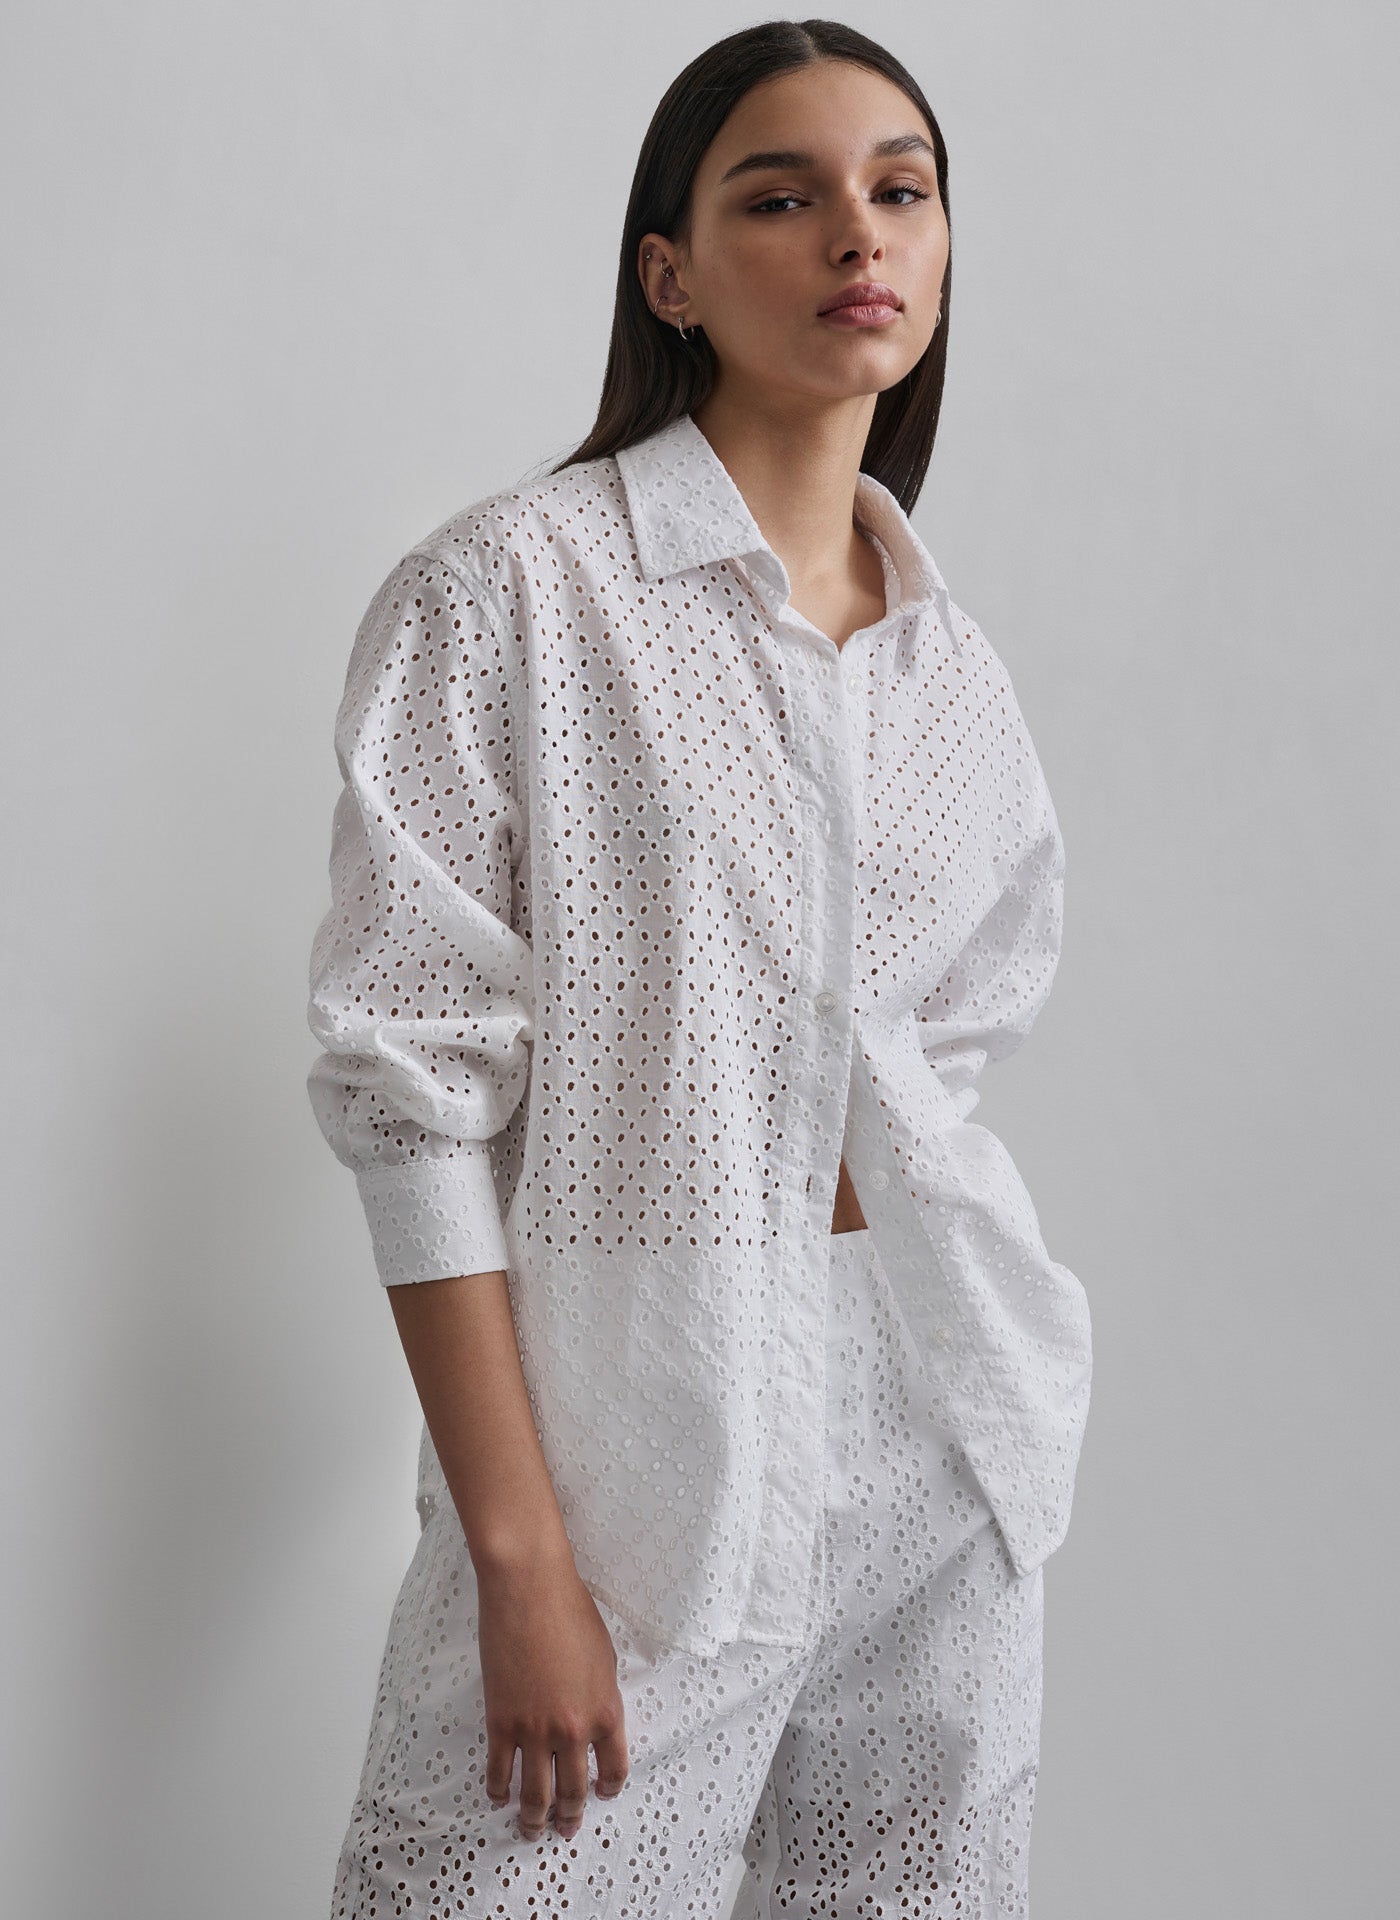 DKNY EYELET BUTTON FRONT SHIRT,White